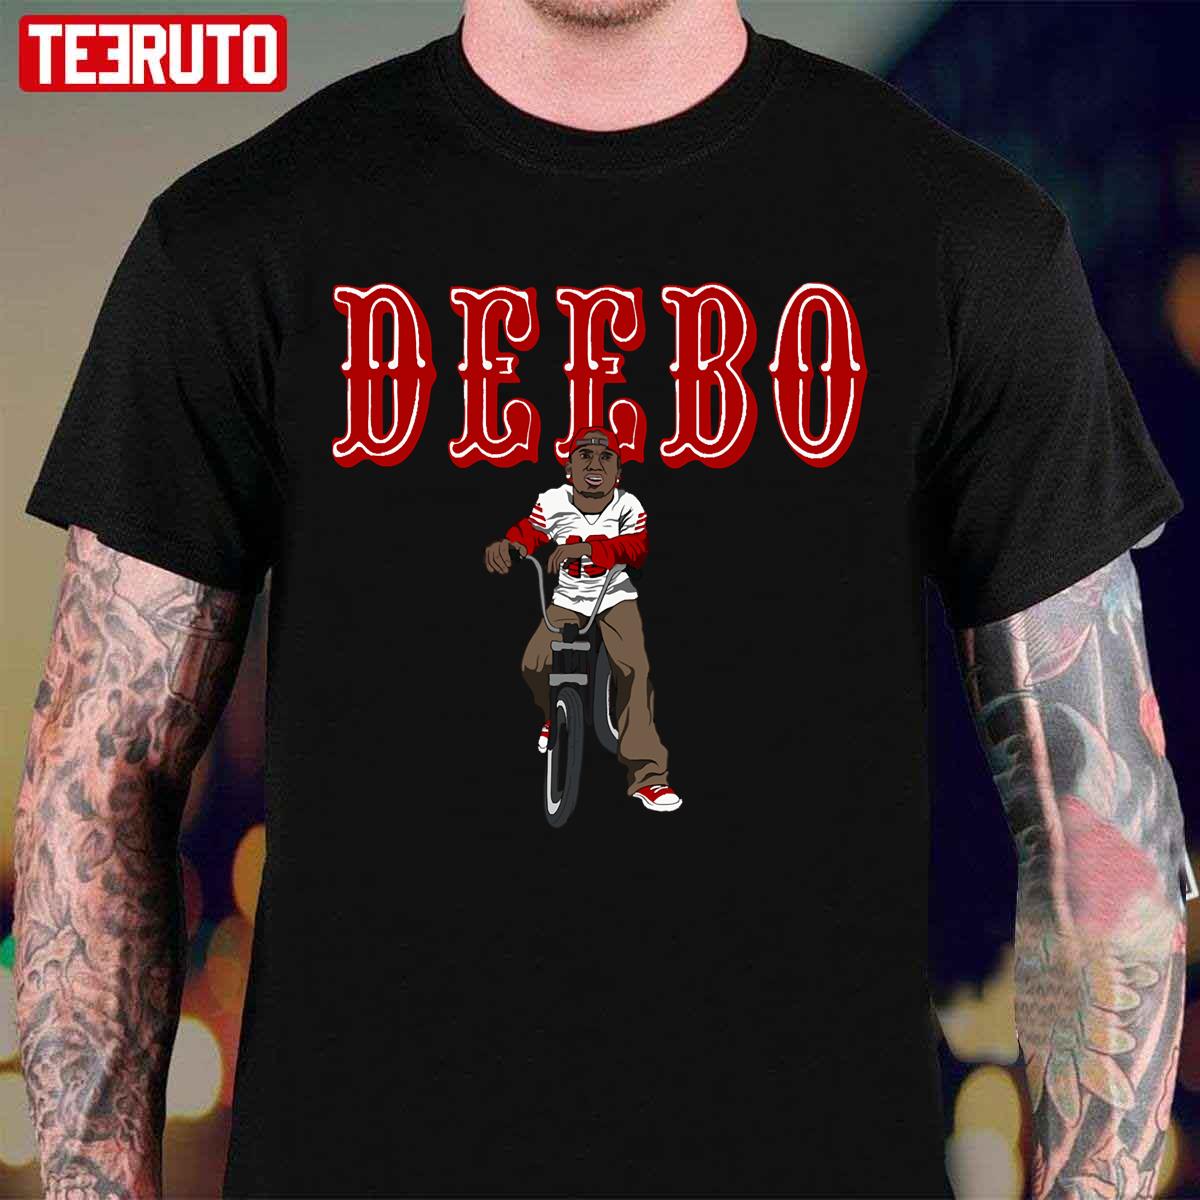 Who Wants Some Of Deebo Unisex T-Shirt